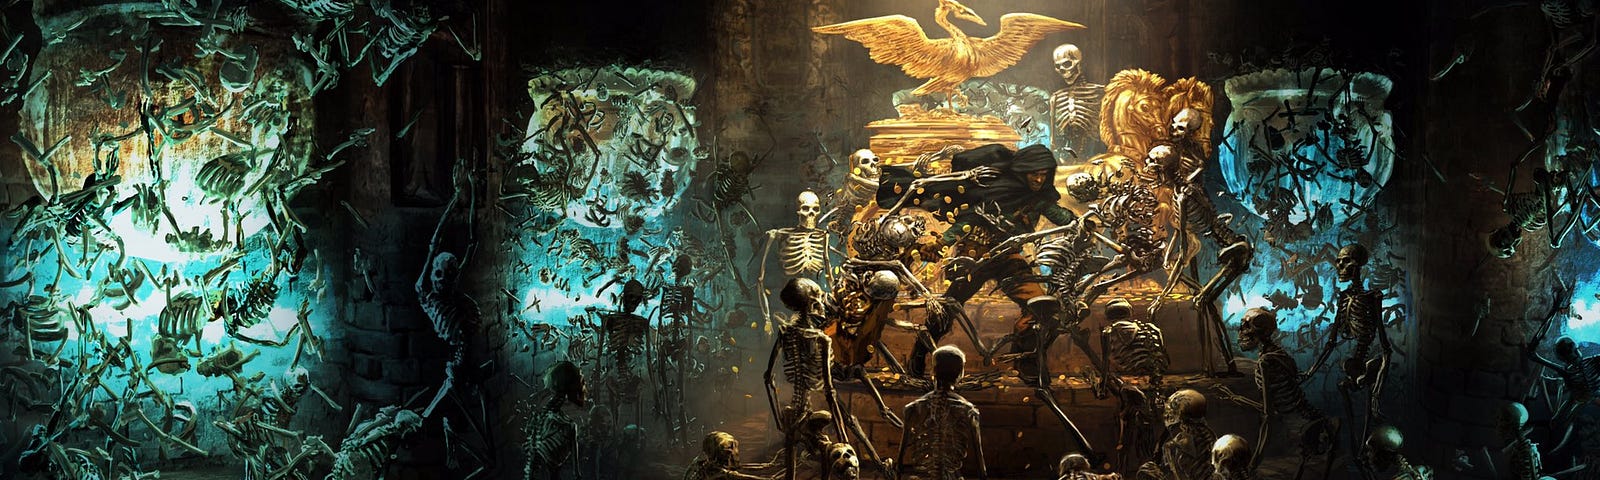 An adventurer fights off hordes of skeletons in an ancient tomb.